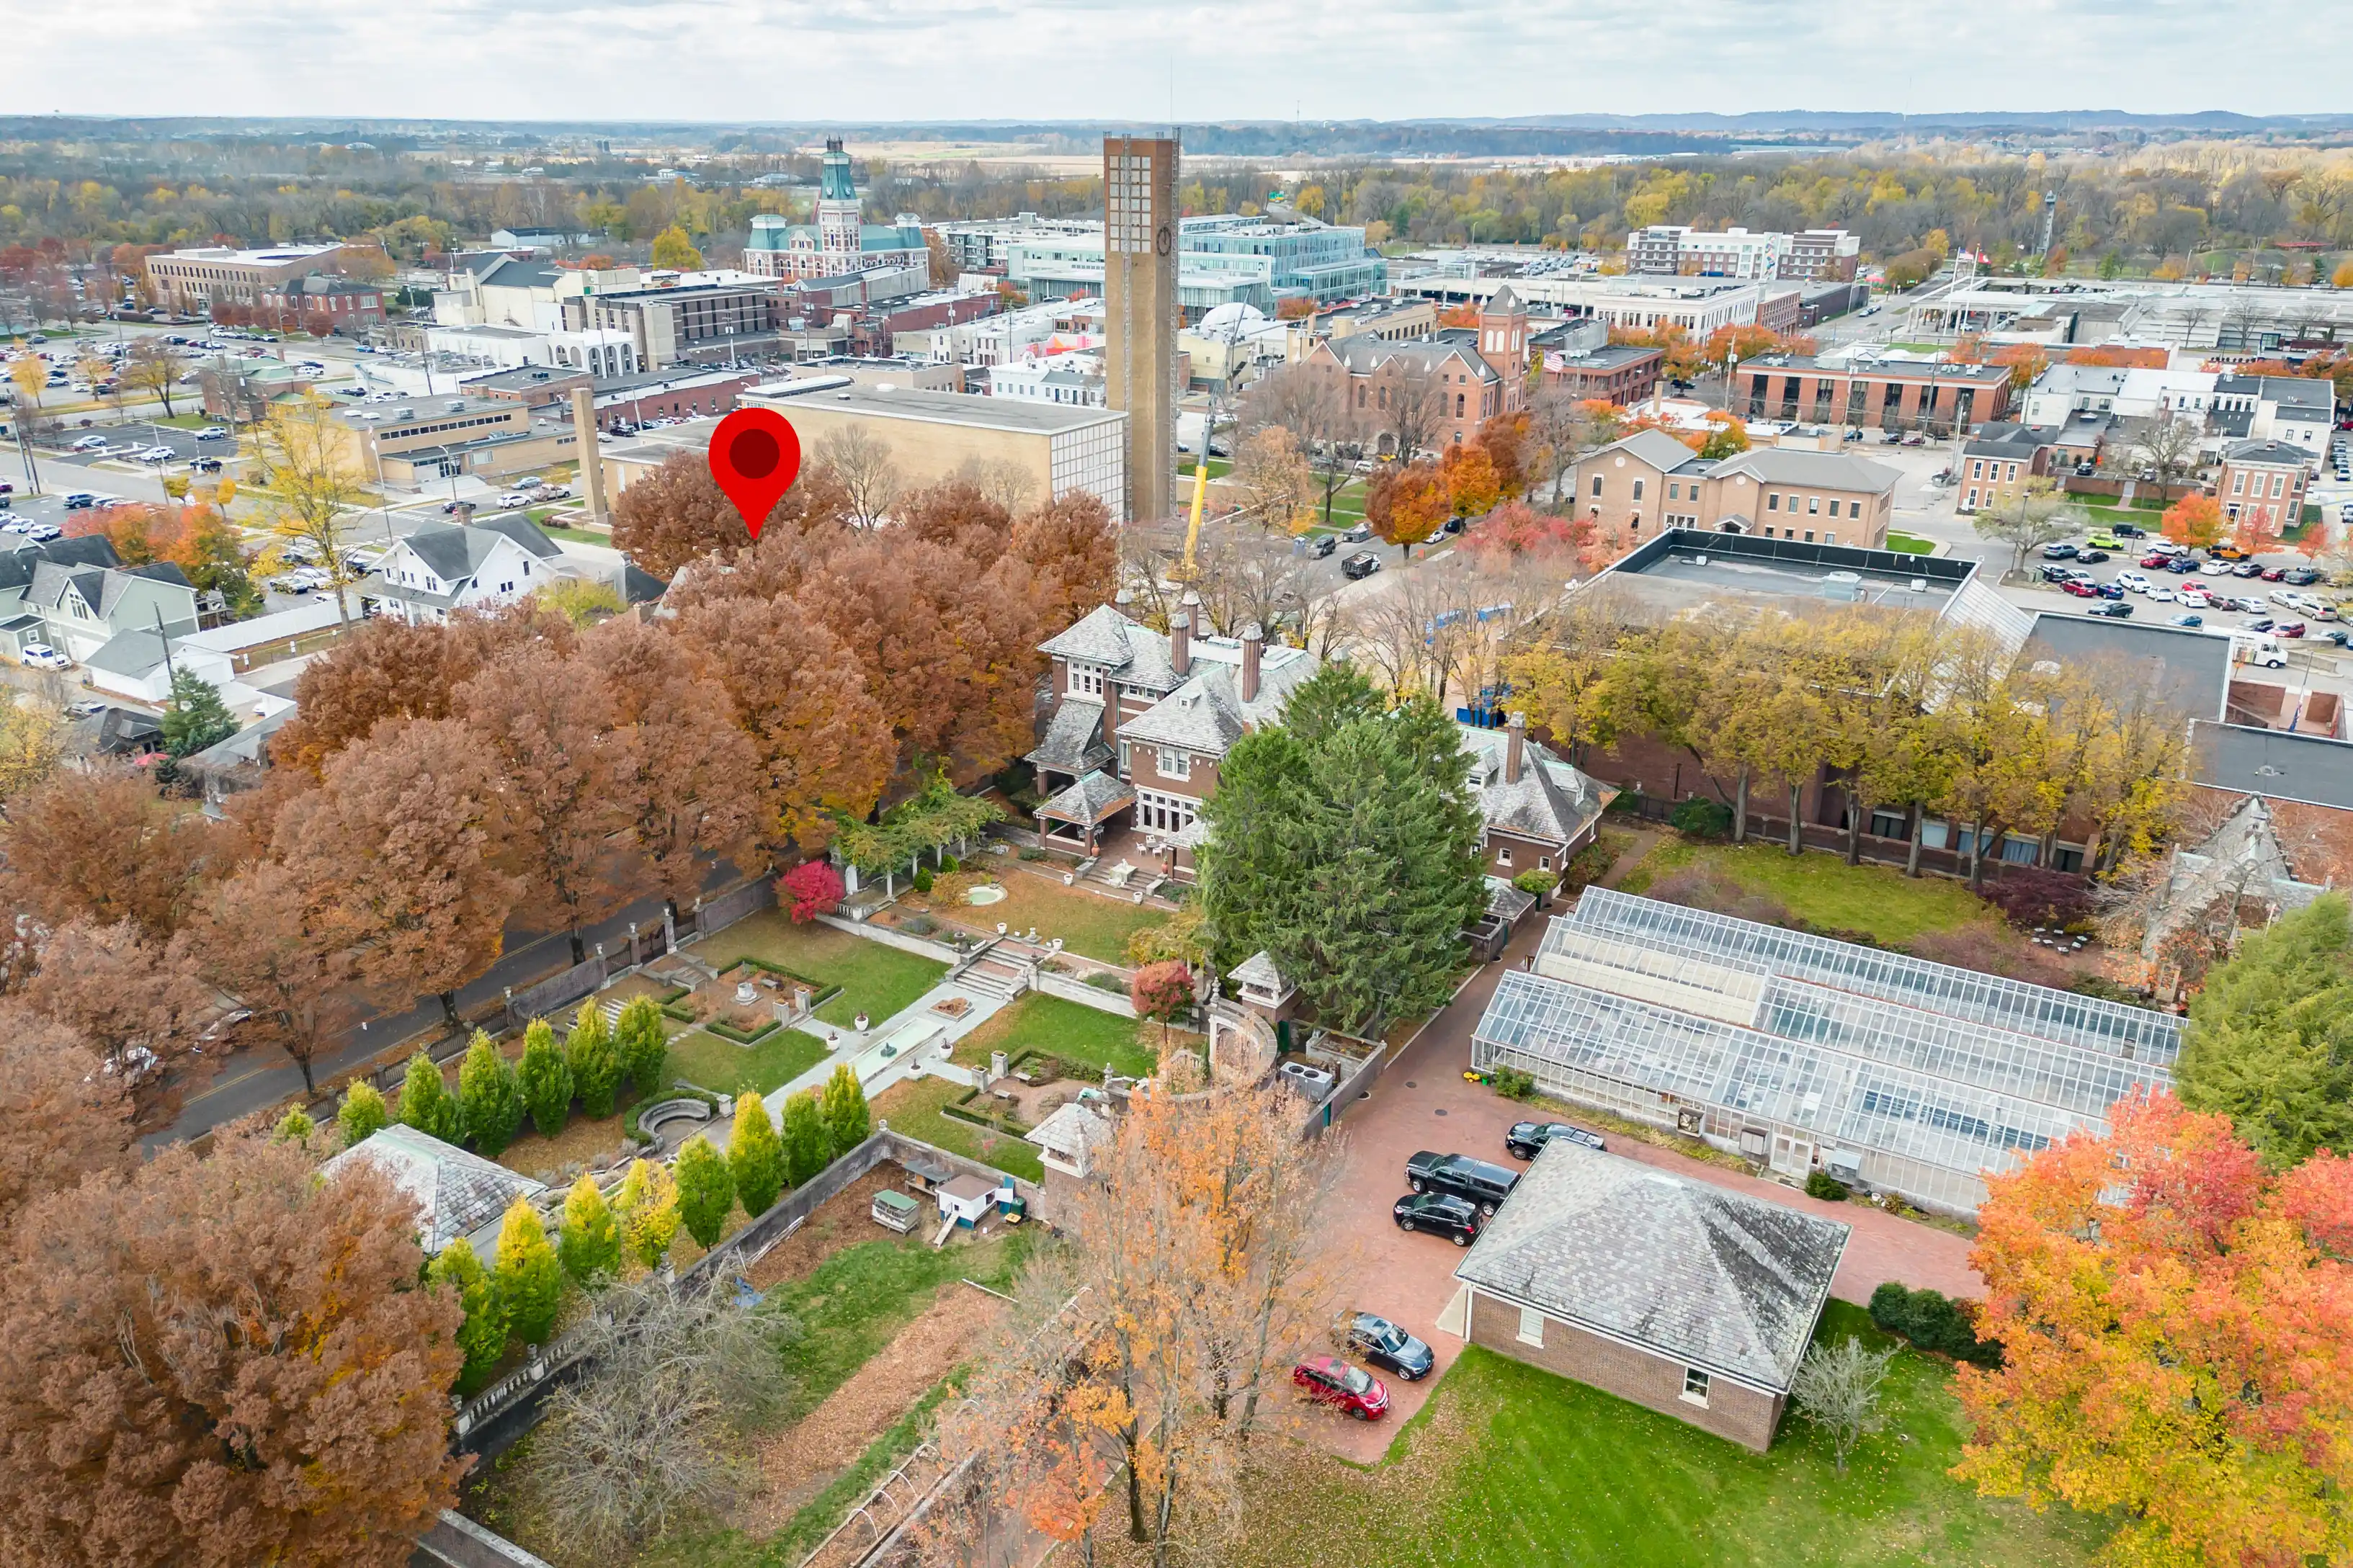 Aerial view of a town with a mixture of residential and commercial buildings, autumn-colored trees, and a prominent clock tower near the center.